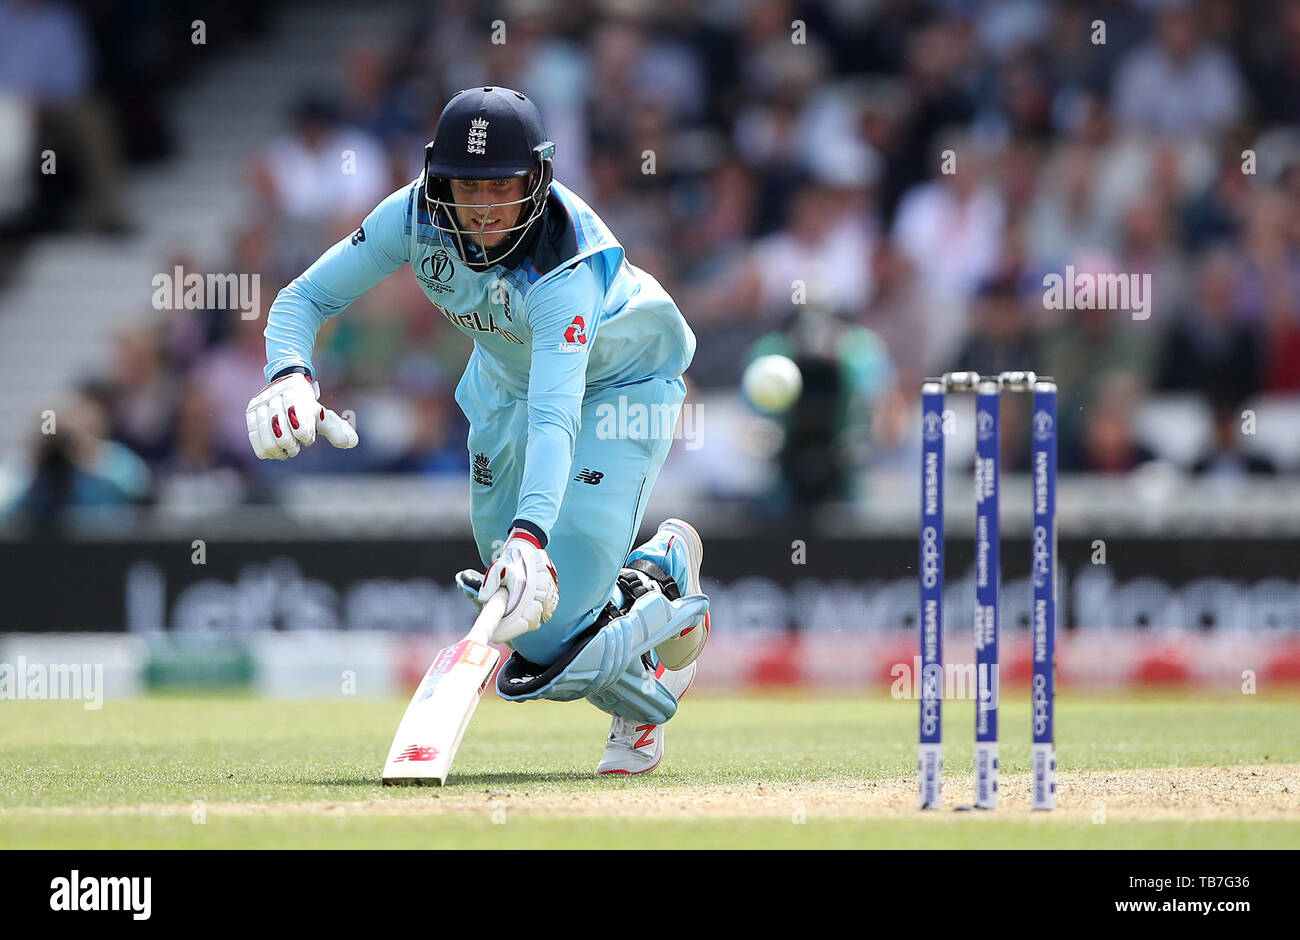 England's Joe Root dives to make his ground at the non-striker's end during the ICC Cricket World Cup group stage match at The Oval, London. Stock Photo